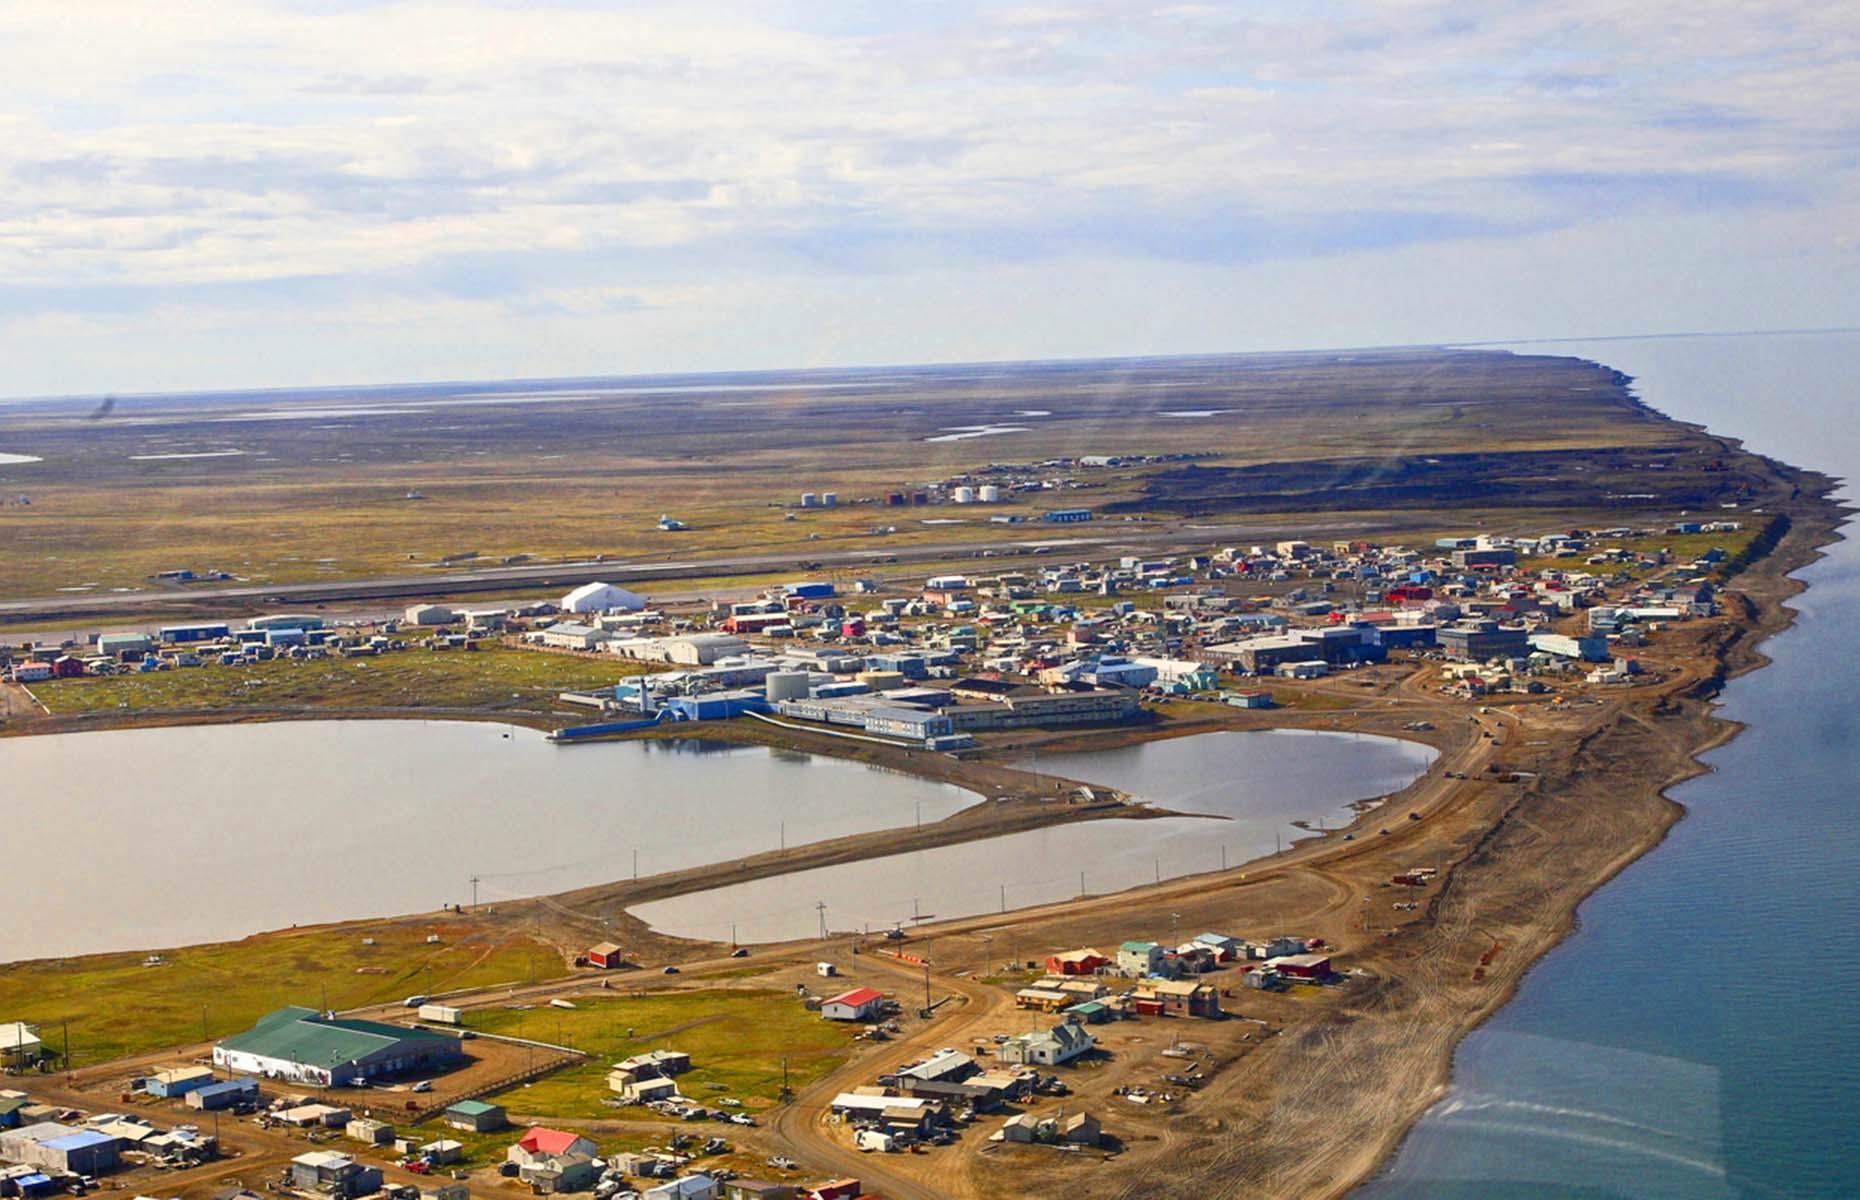 <p>The northernmost community in the United States, <a href="https://www.utqiagvik.us/about-itqiagvik/">Utqiagvik</a> feels completely cut off from the world. With no roads connecting it to other settlements, the dirt roads that do exist lead just a few miles outside the main town.</p>